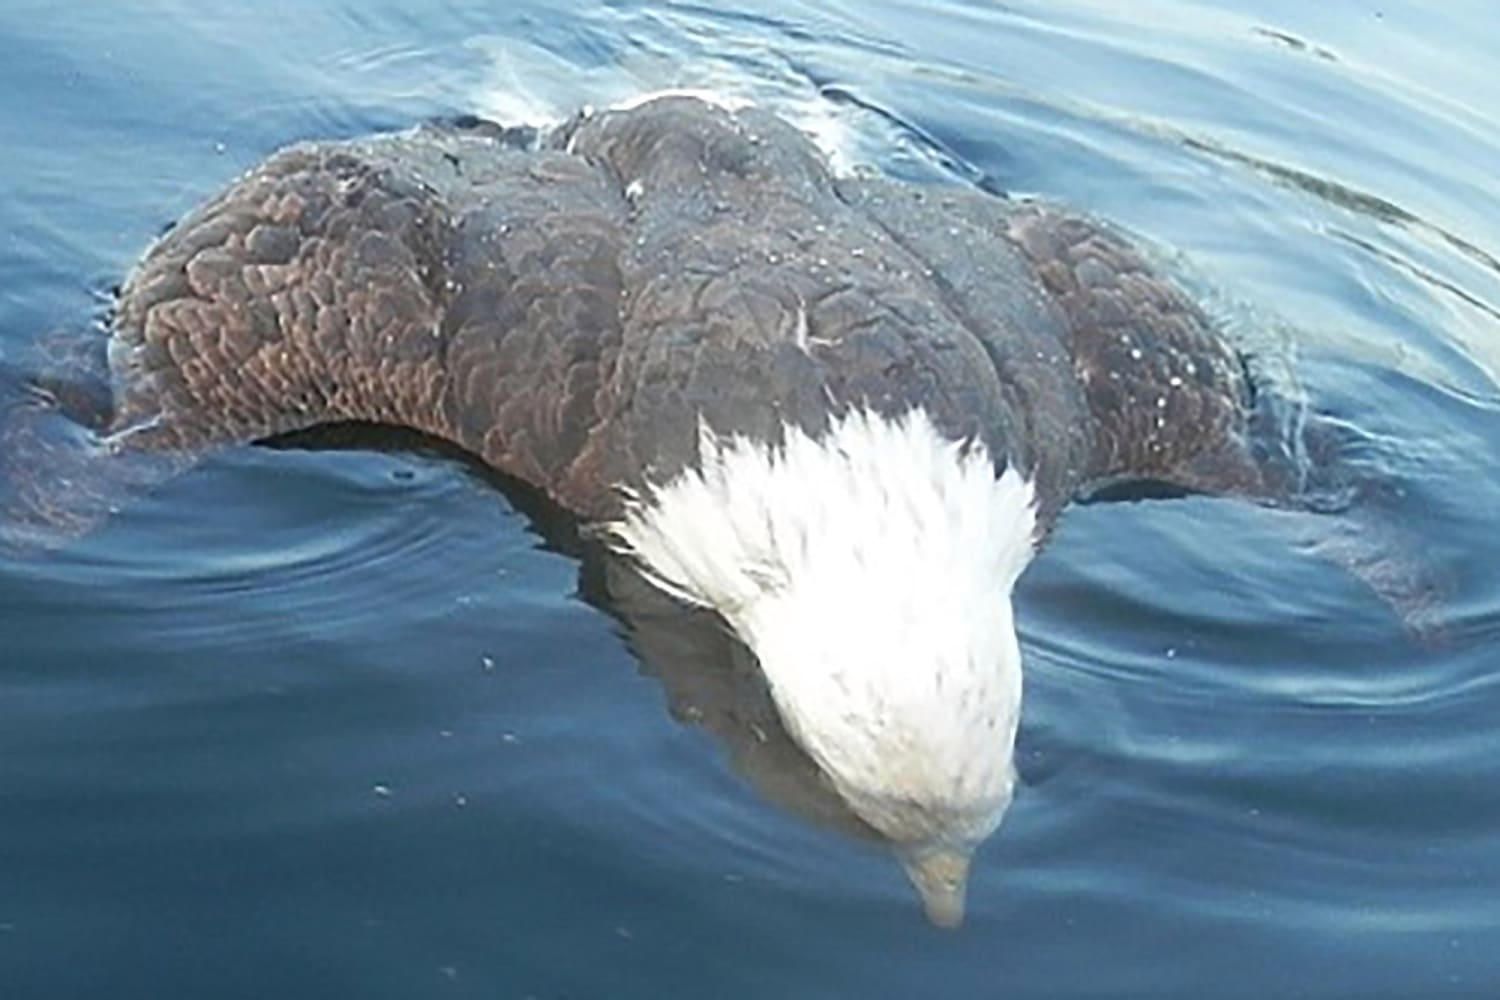 After a thorough investigation by Maine wildlife biologists, it was concluded this bald eagle was stabbed in the heart by a loon as the bald eagle swooped down to grab one of the loon's chicks. While previously rumored, this full investigation was the first to prove that loons can kill bald eagles.